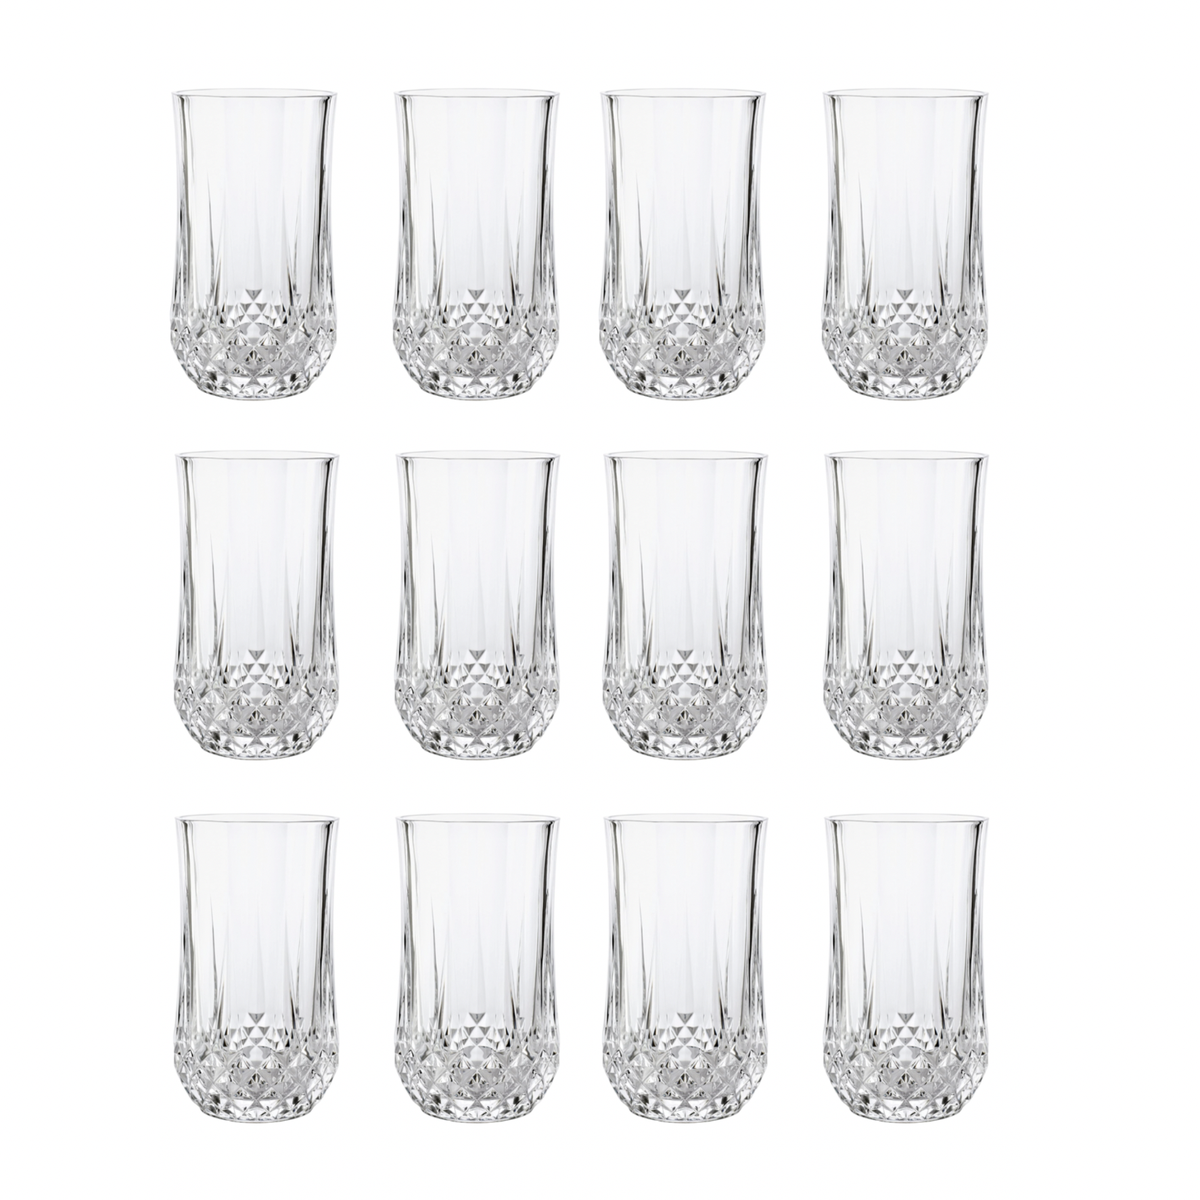 Retro Crystal Drinking Glasses Set Of 12 Shop Today Get It Tomorrow